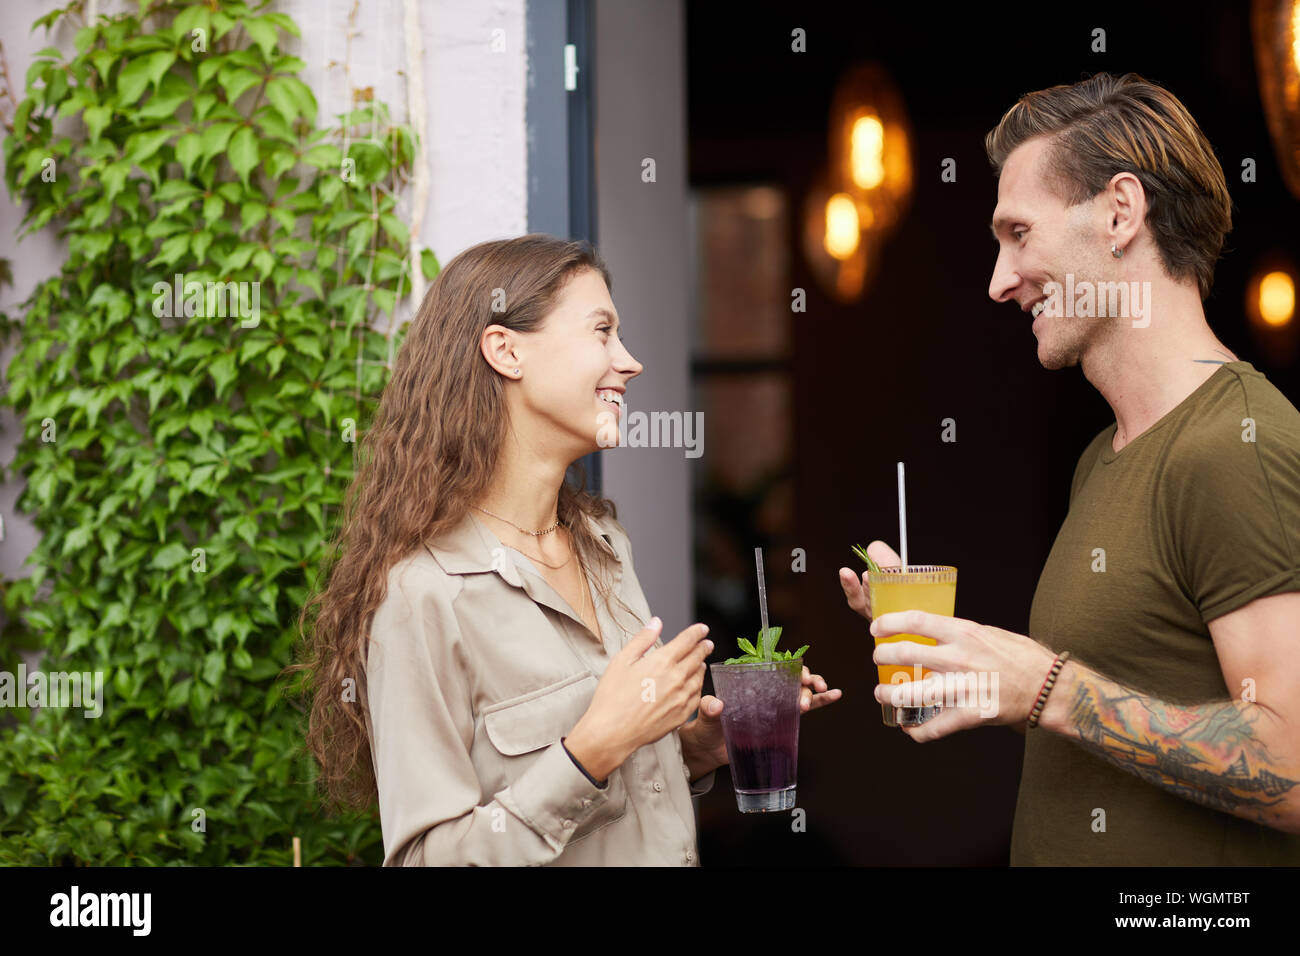 Side view portrait of smiling young woman talking to man outdoors standing by cafe door, both holding cold refreshing drinks, copy space Stock Photo